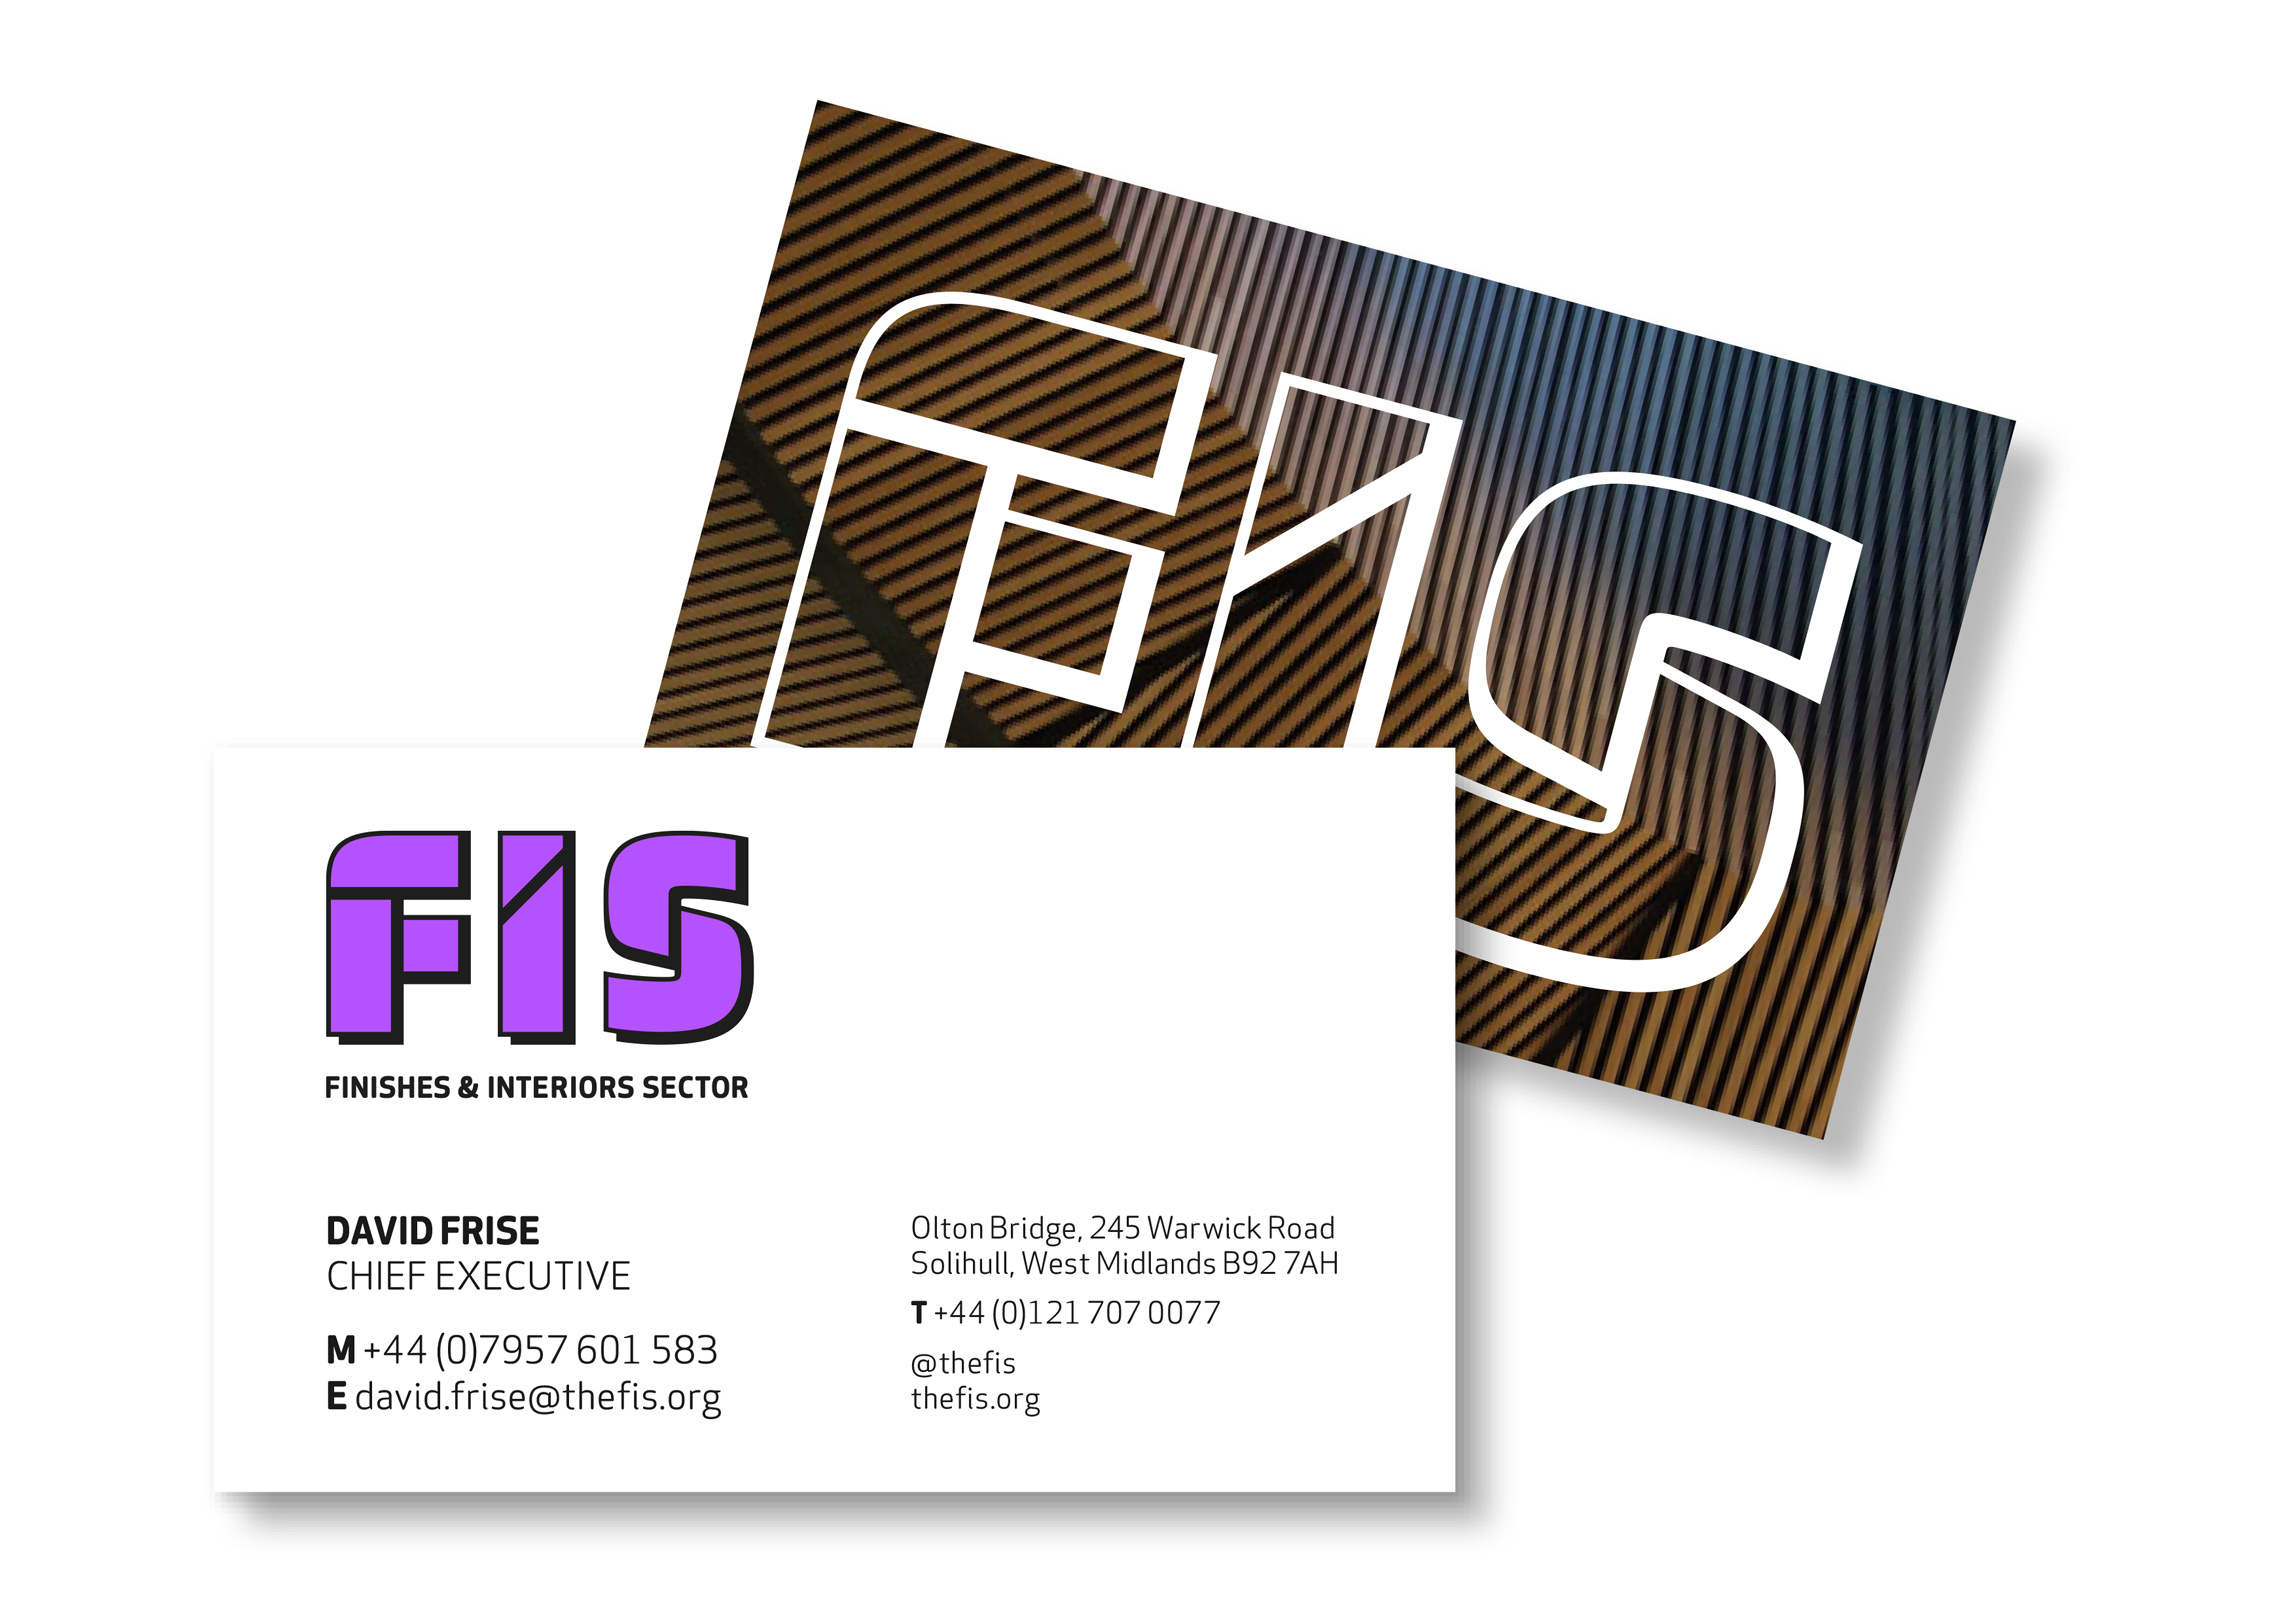 FIS finishes and interiors sector rebrand business cards